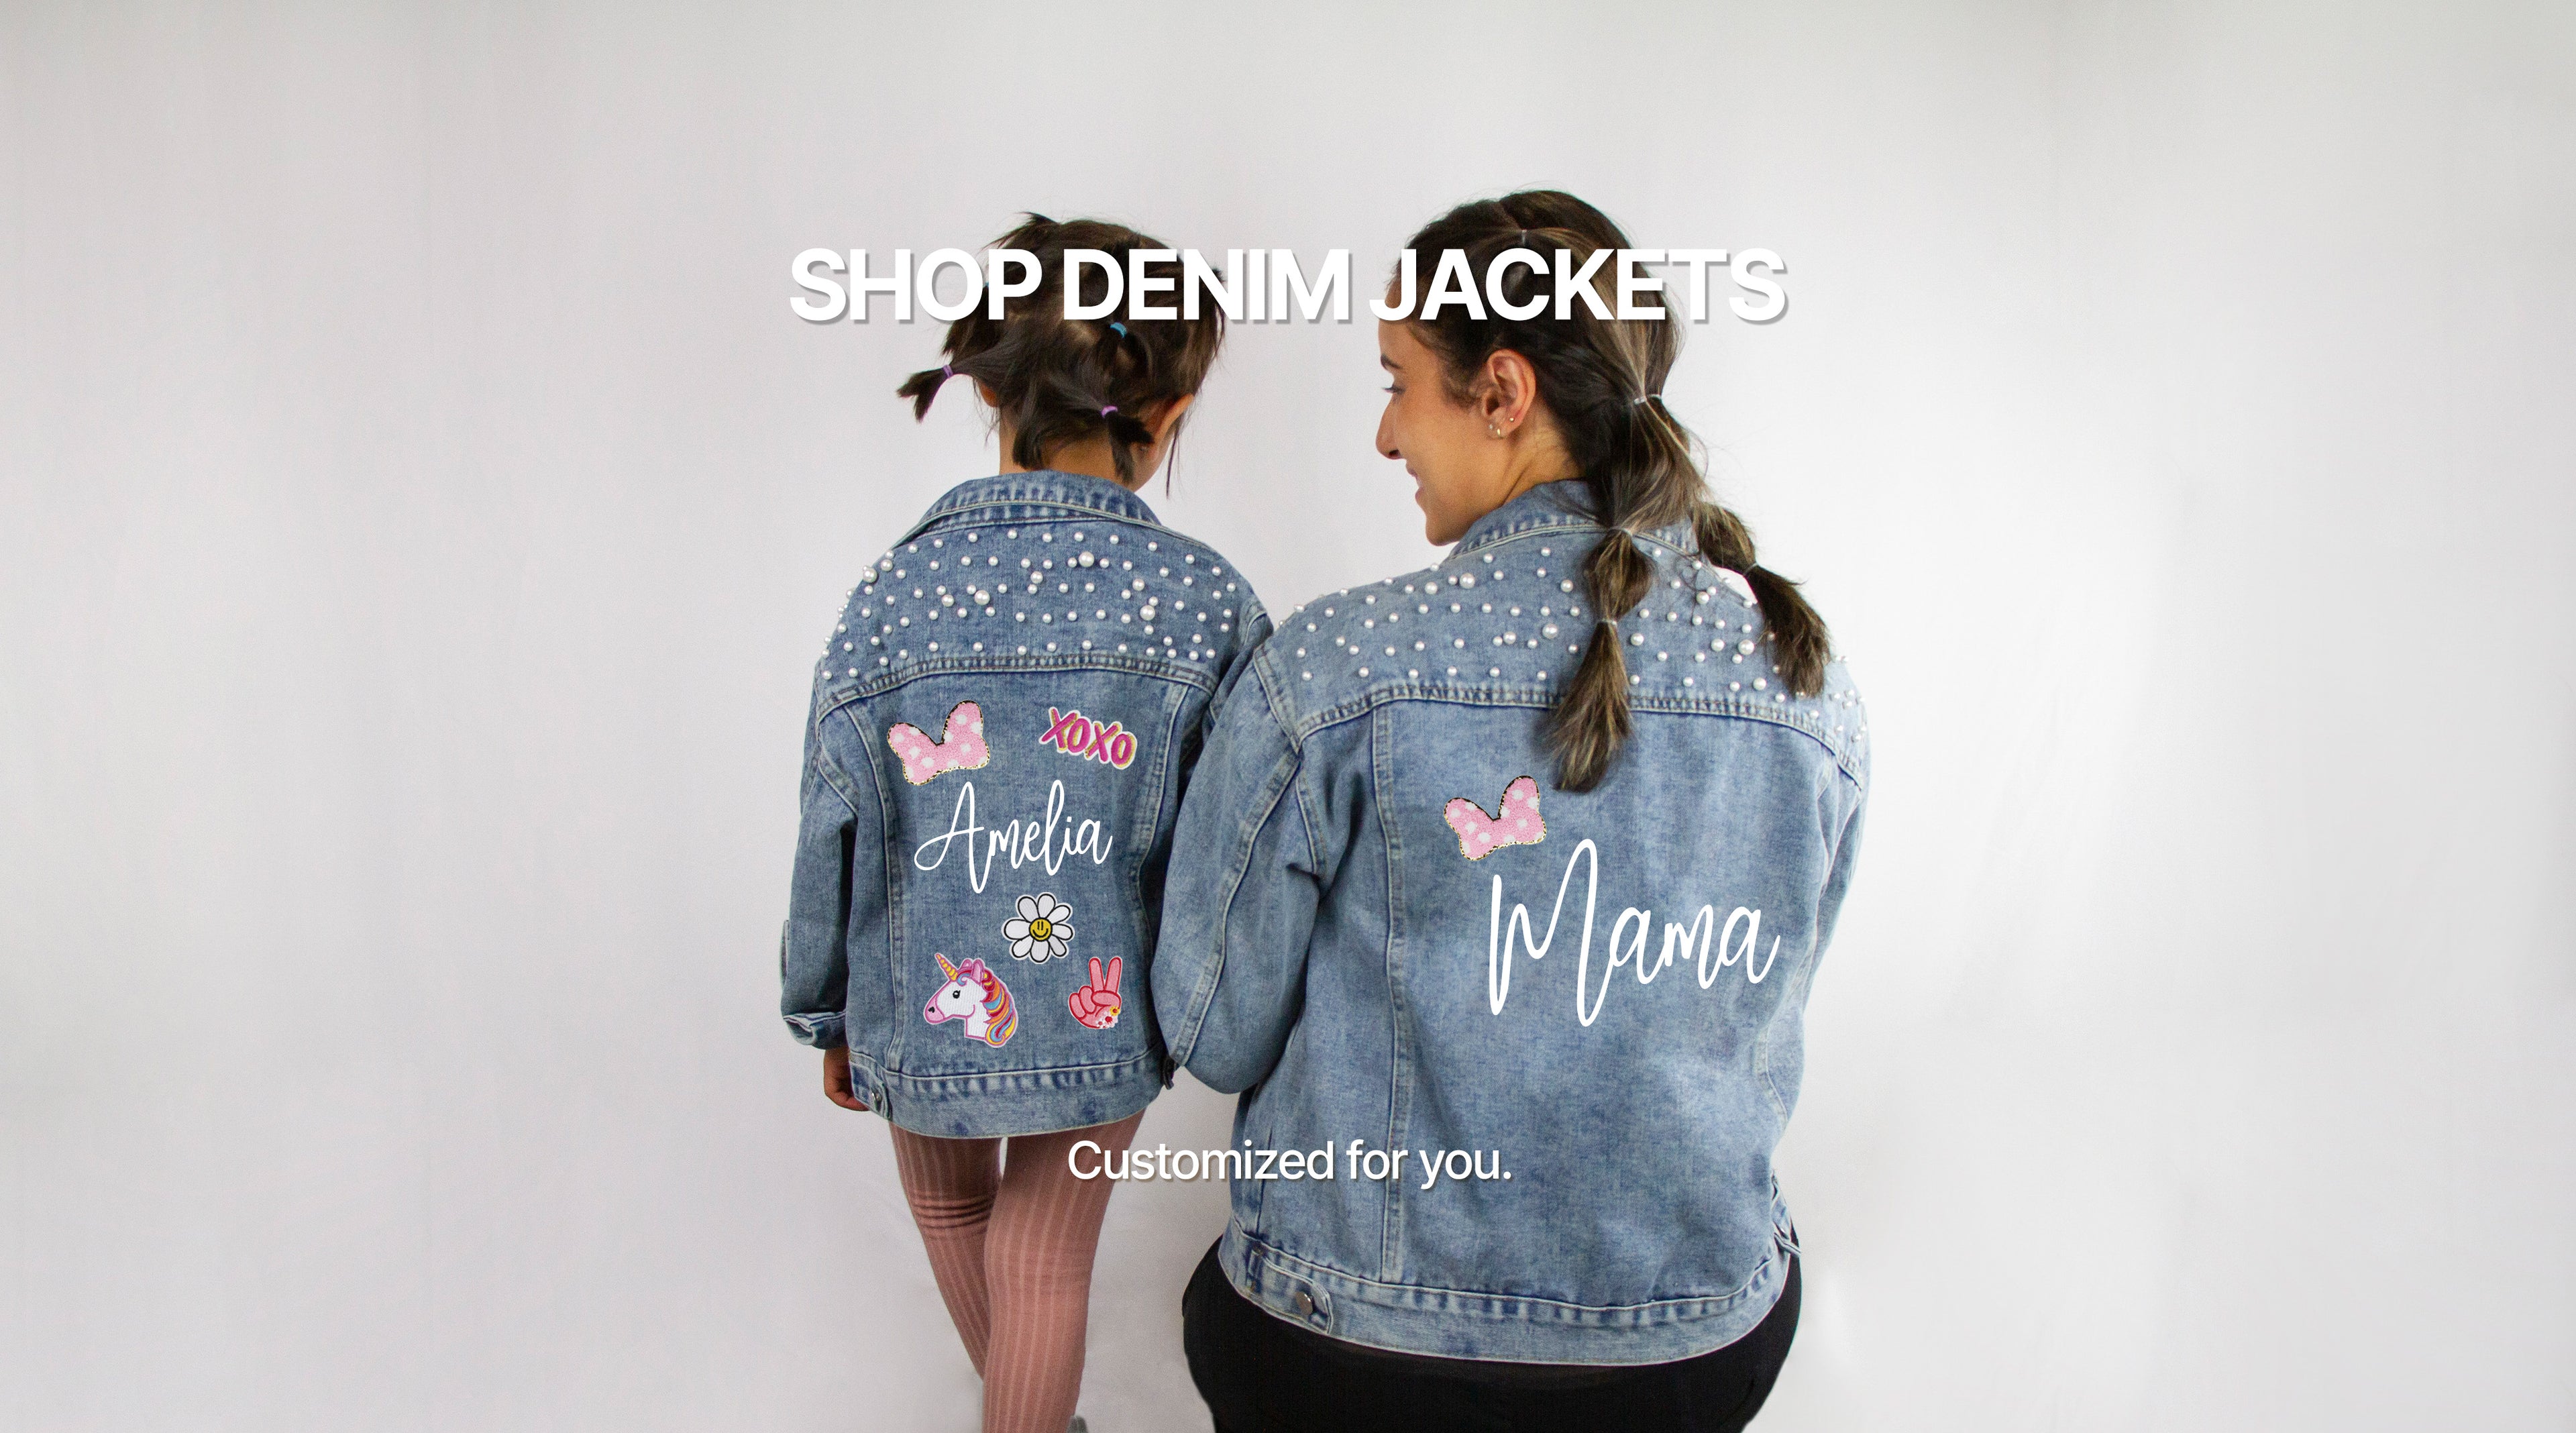 Custom Denim Jackets for Adults and Kids